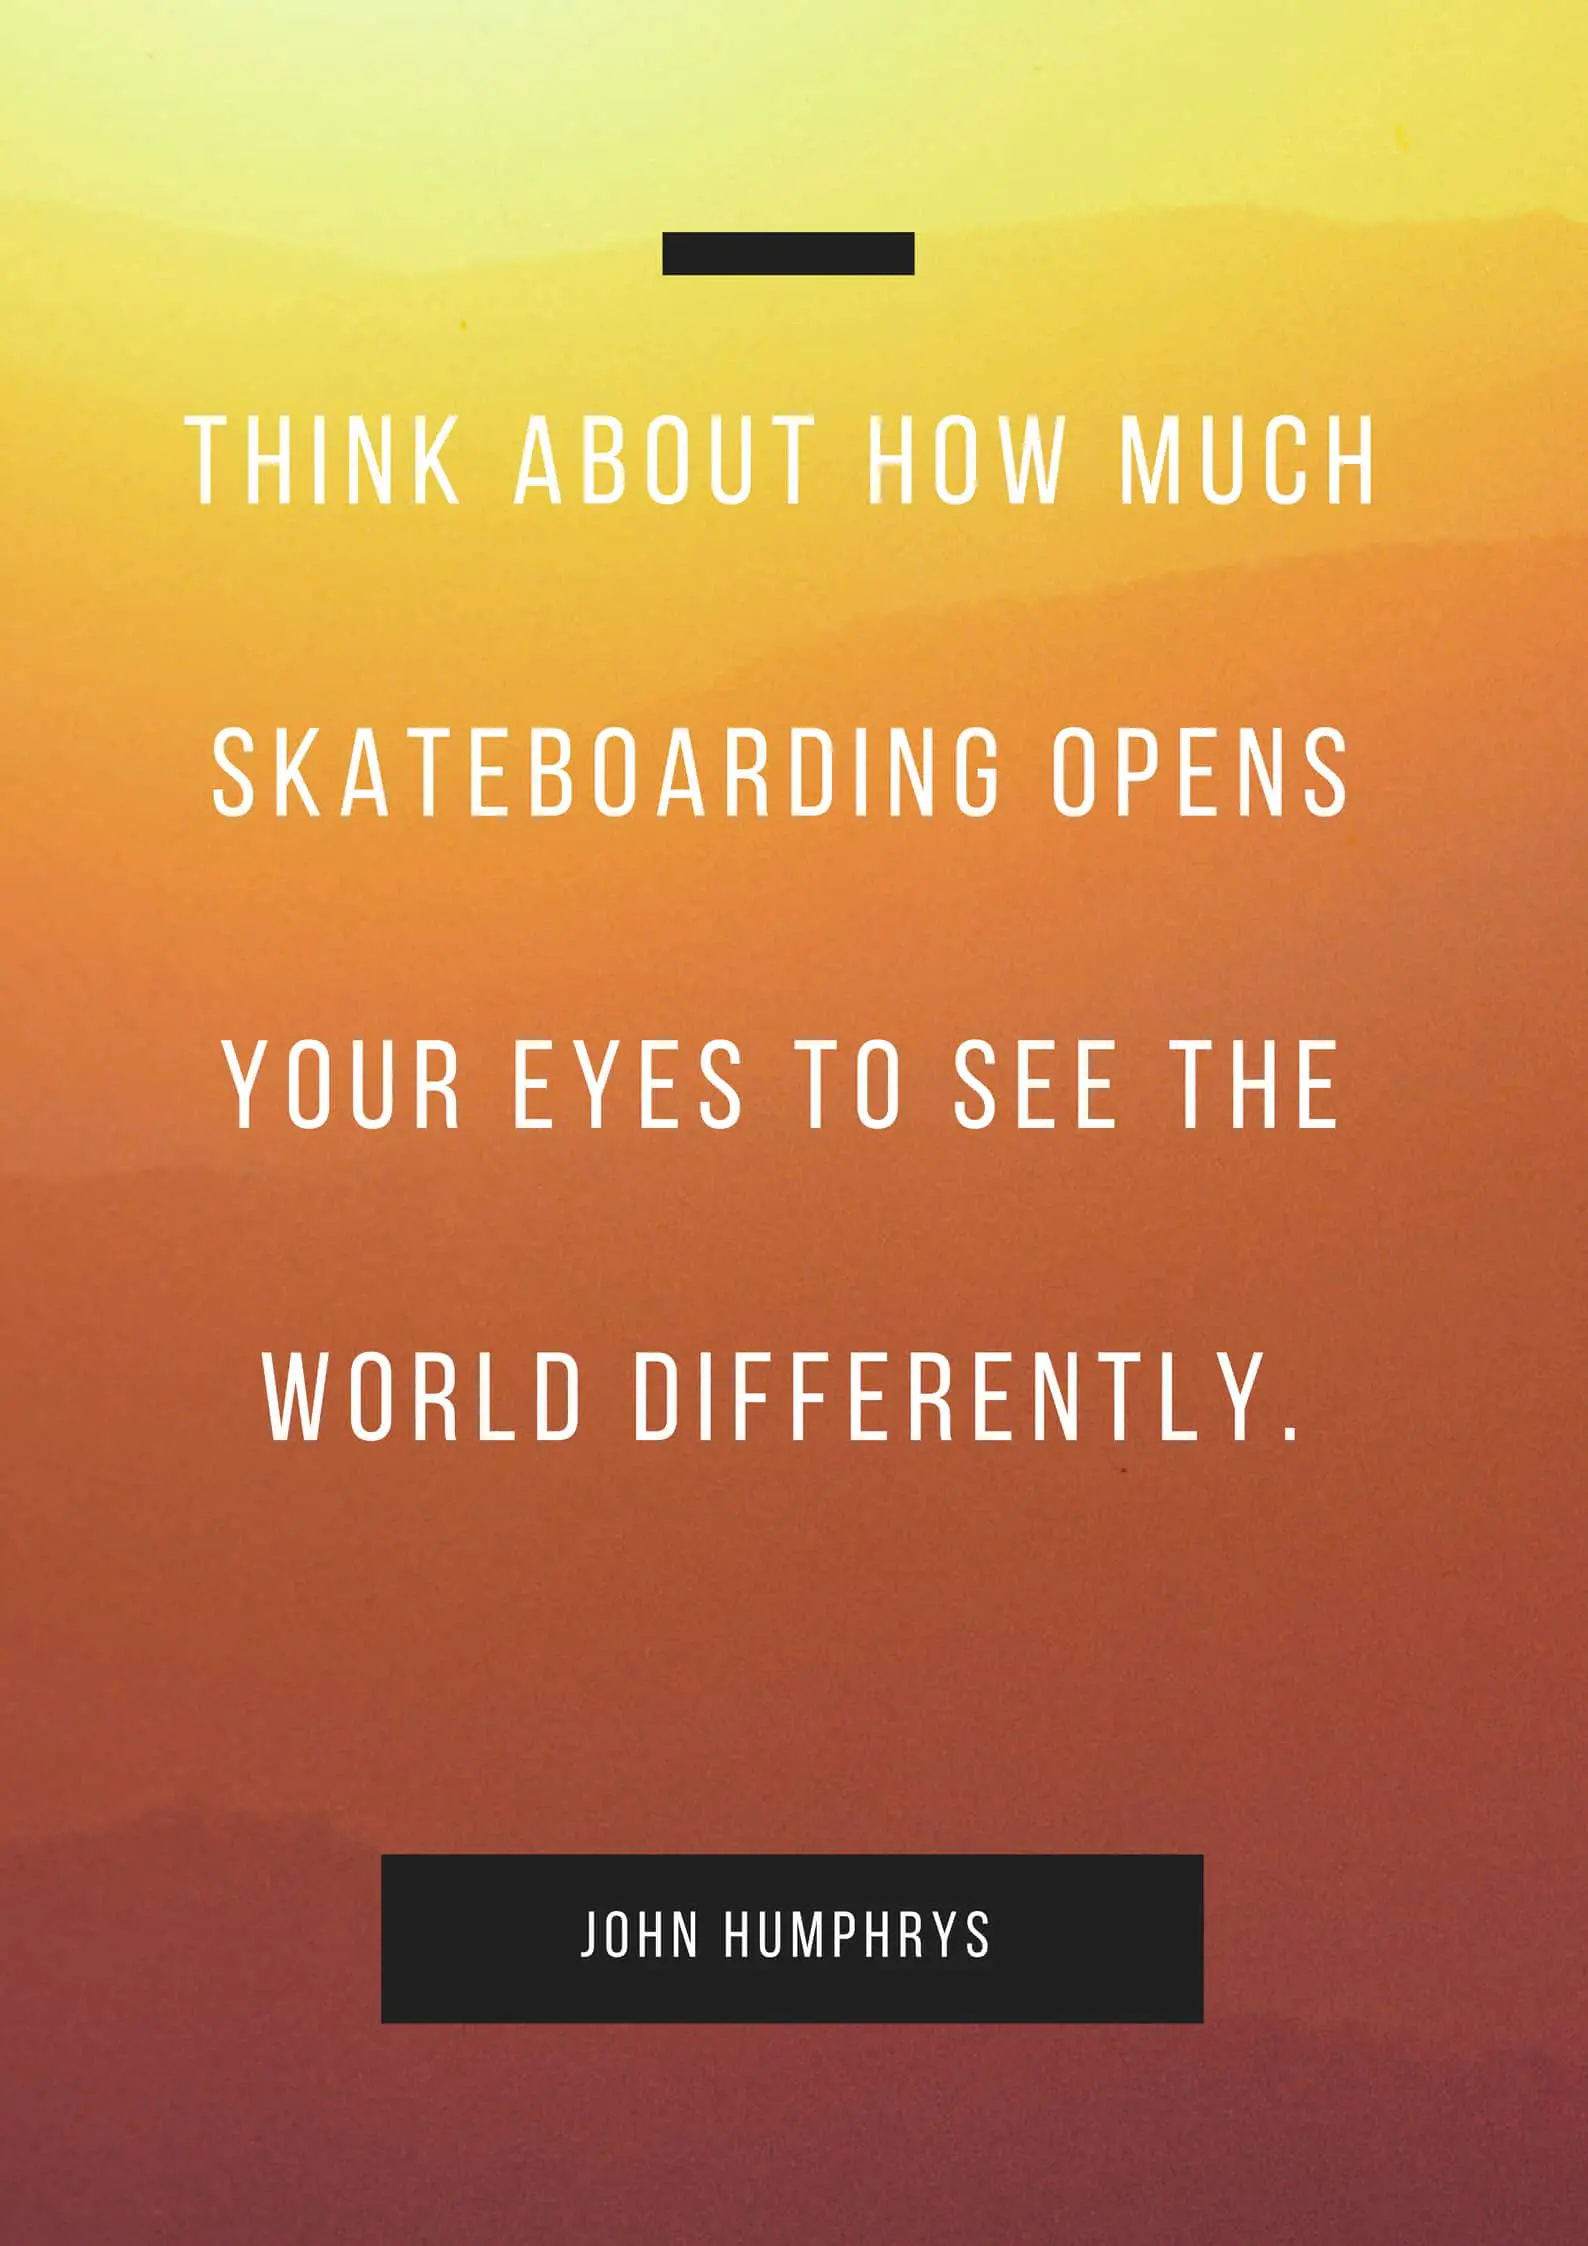 THINK ABOUT HOW MUCH SKATEBOARDING OPENS YOUR EYES TO SEE THE WORLD DIFFERENTLY.